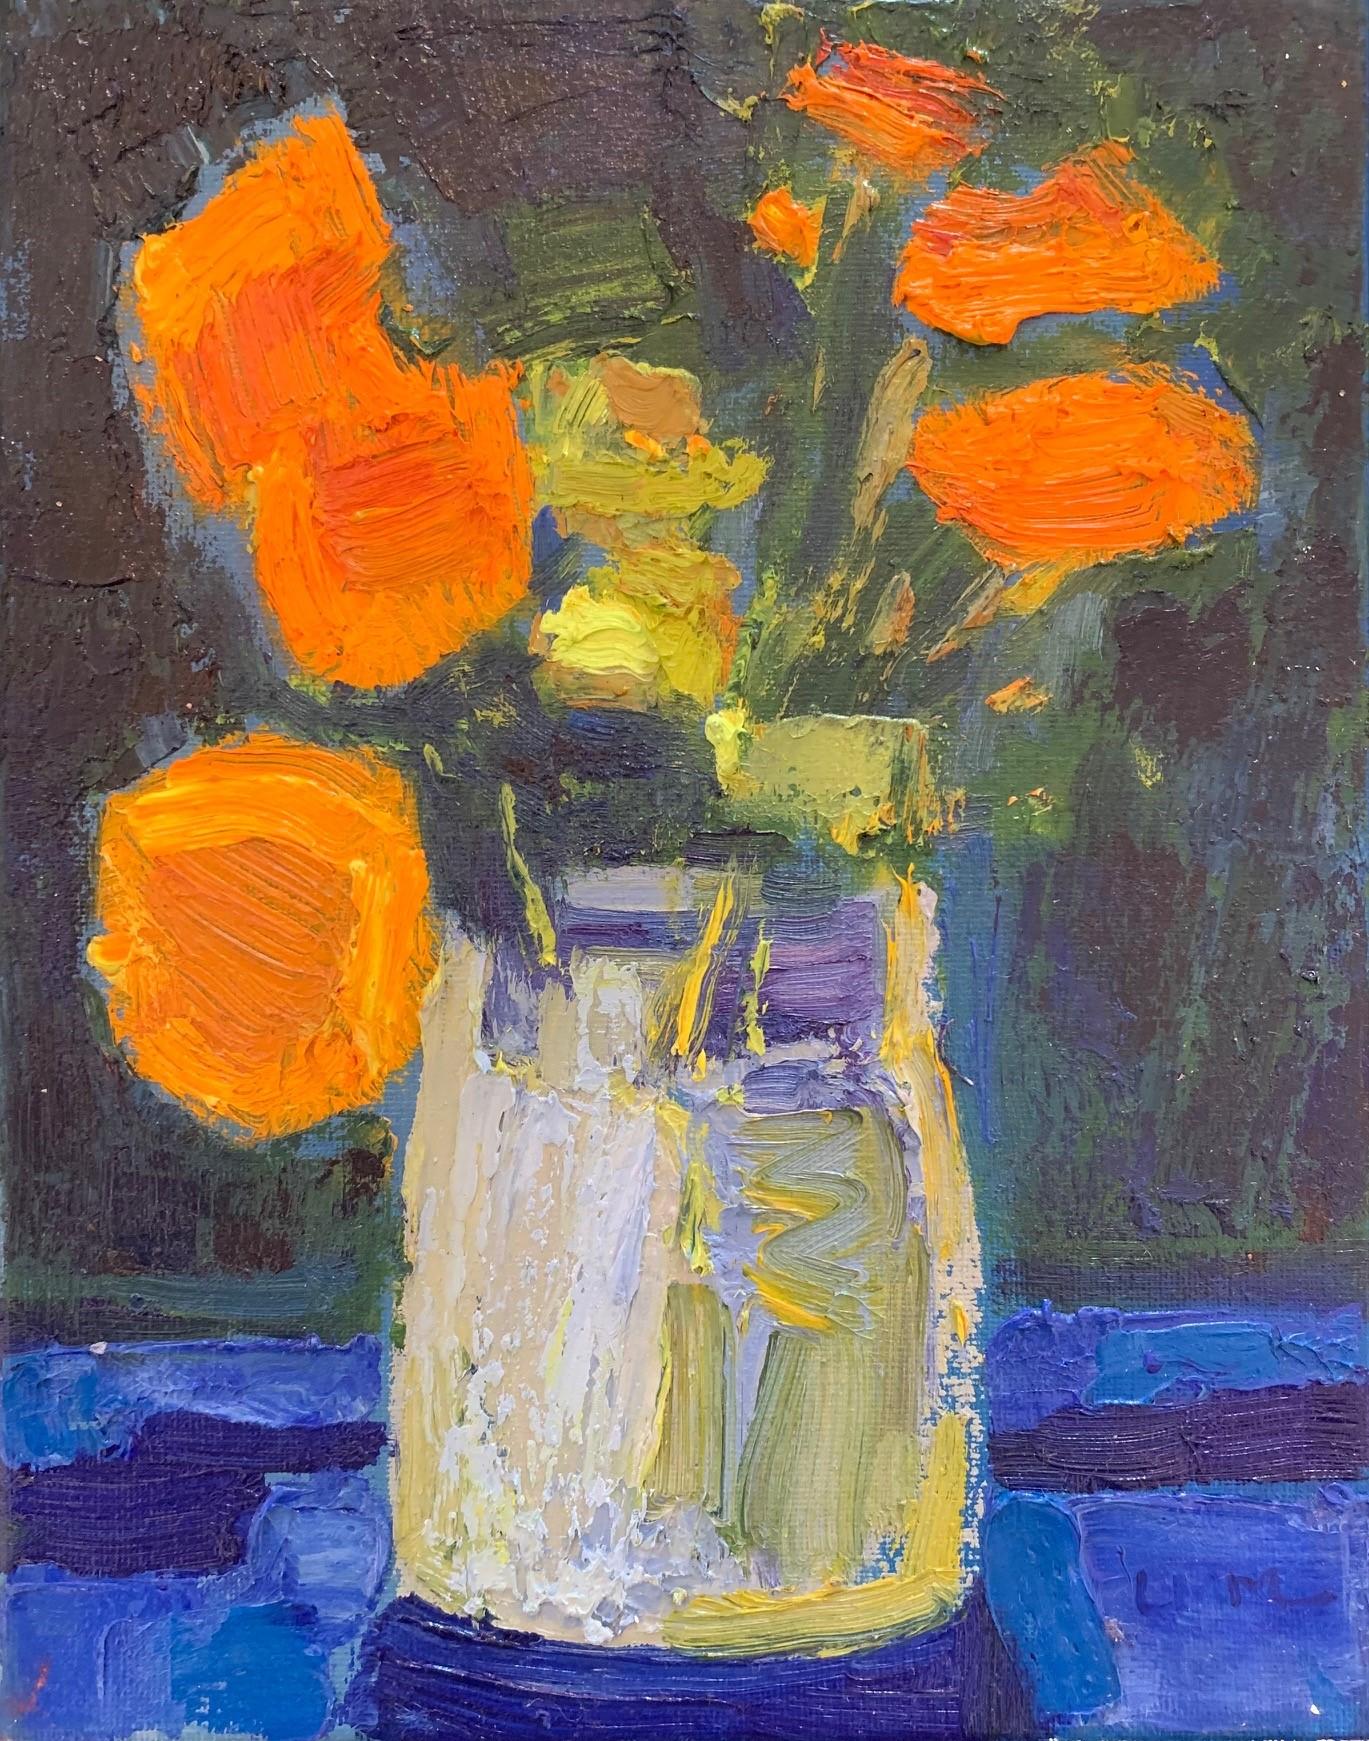 ‘Orange Flowers In Blue Vase’ Still Life Contemporary Mixed Media by Ming Ming